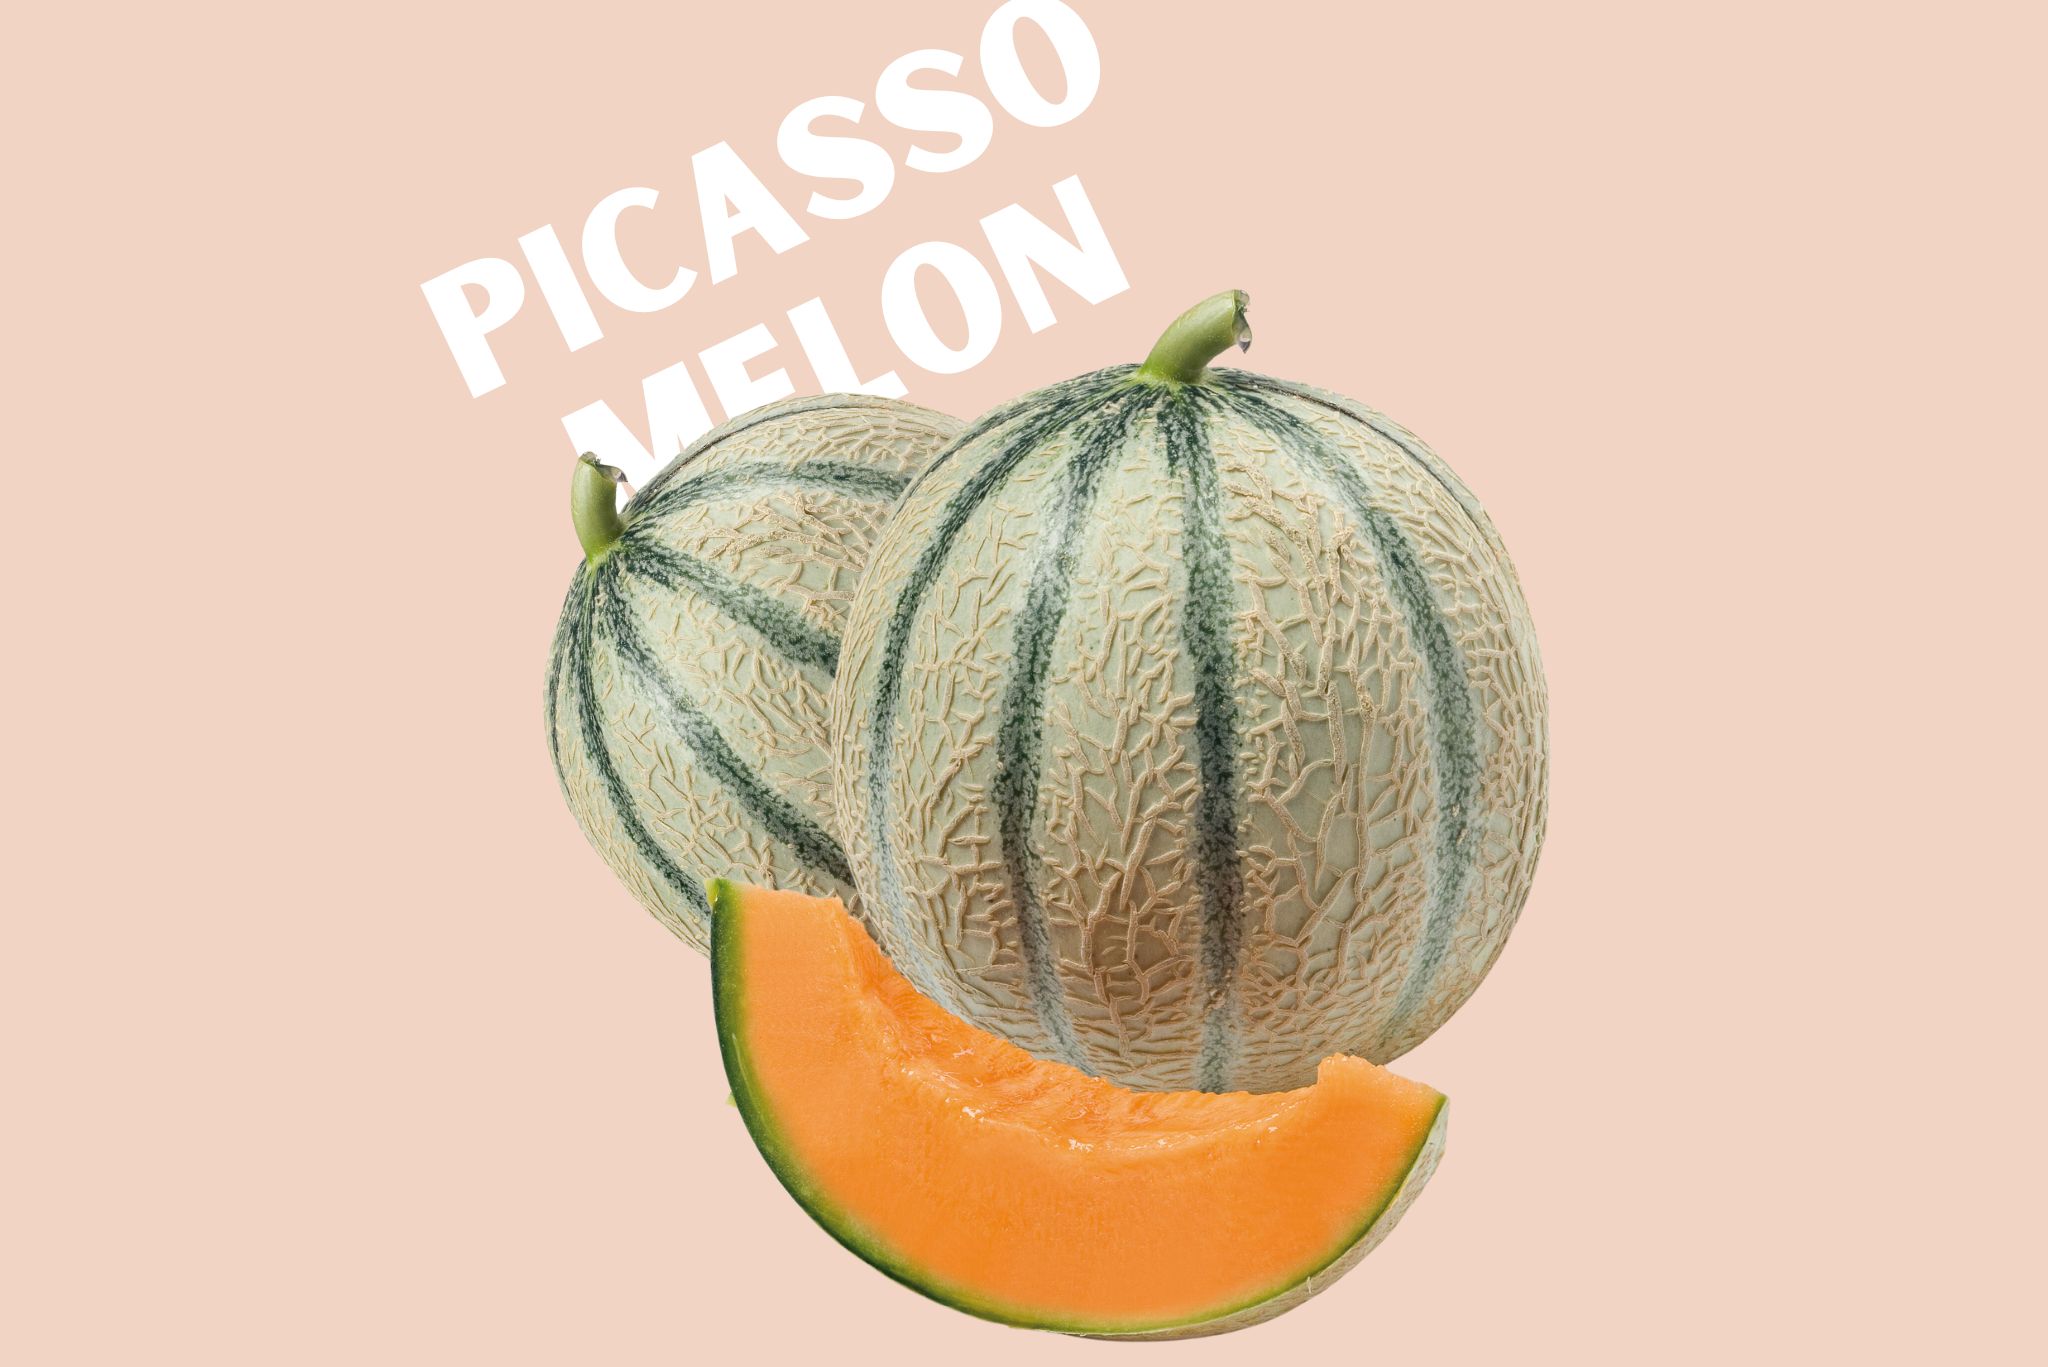 Picasso melon whole and sliced